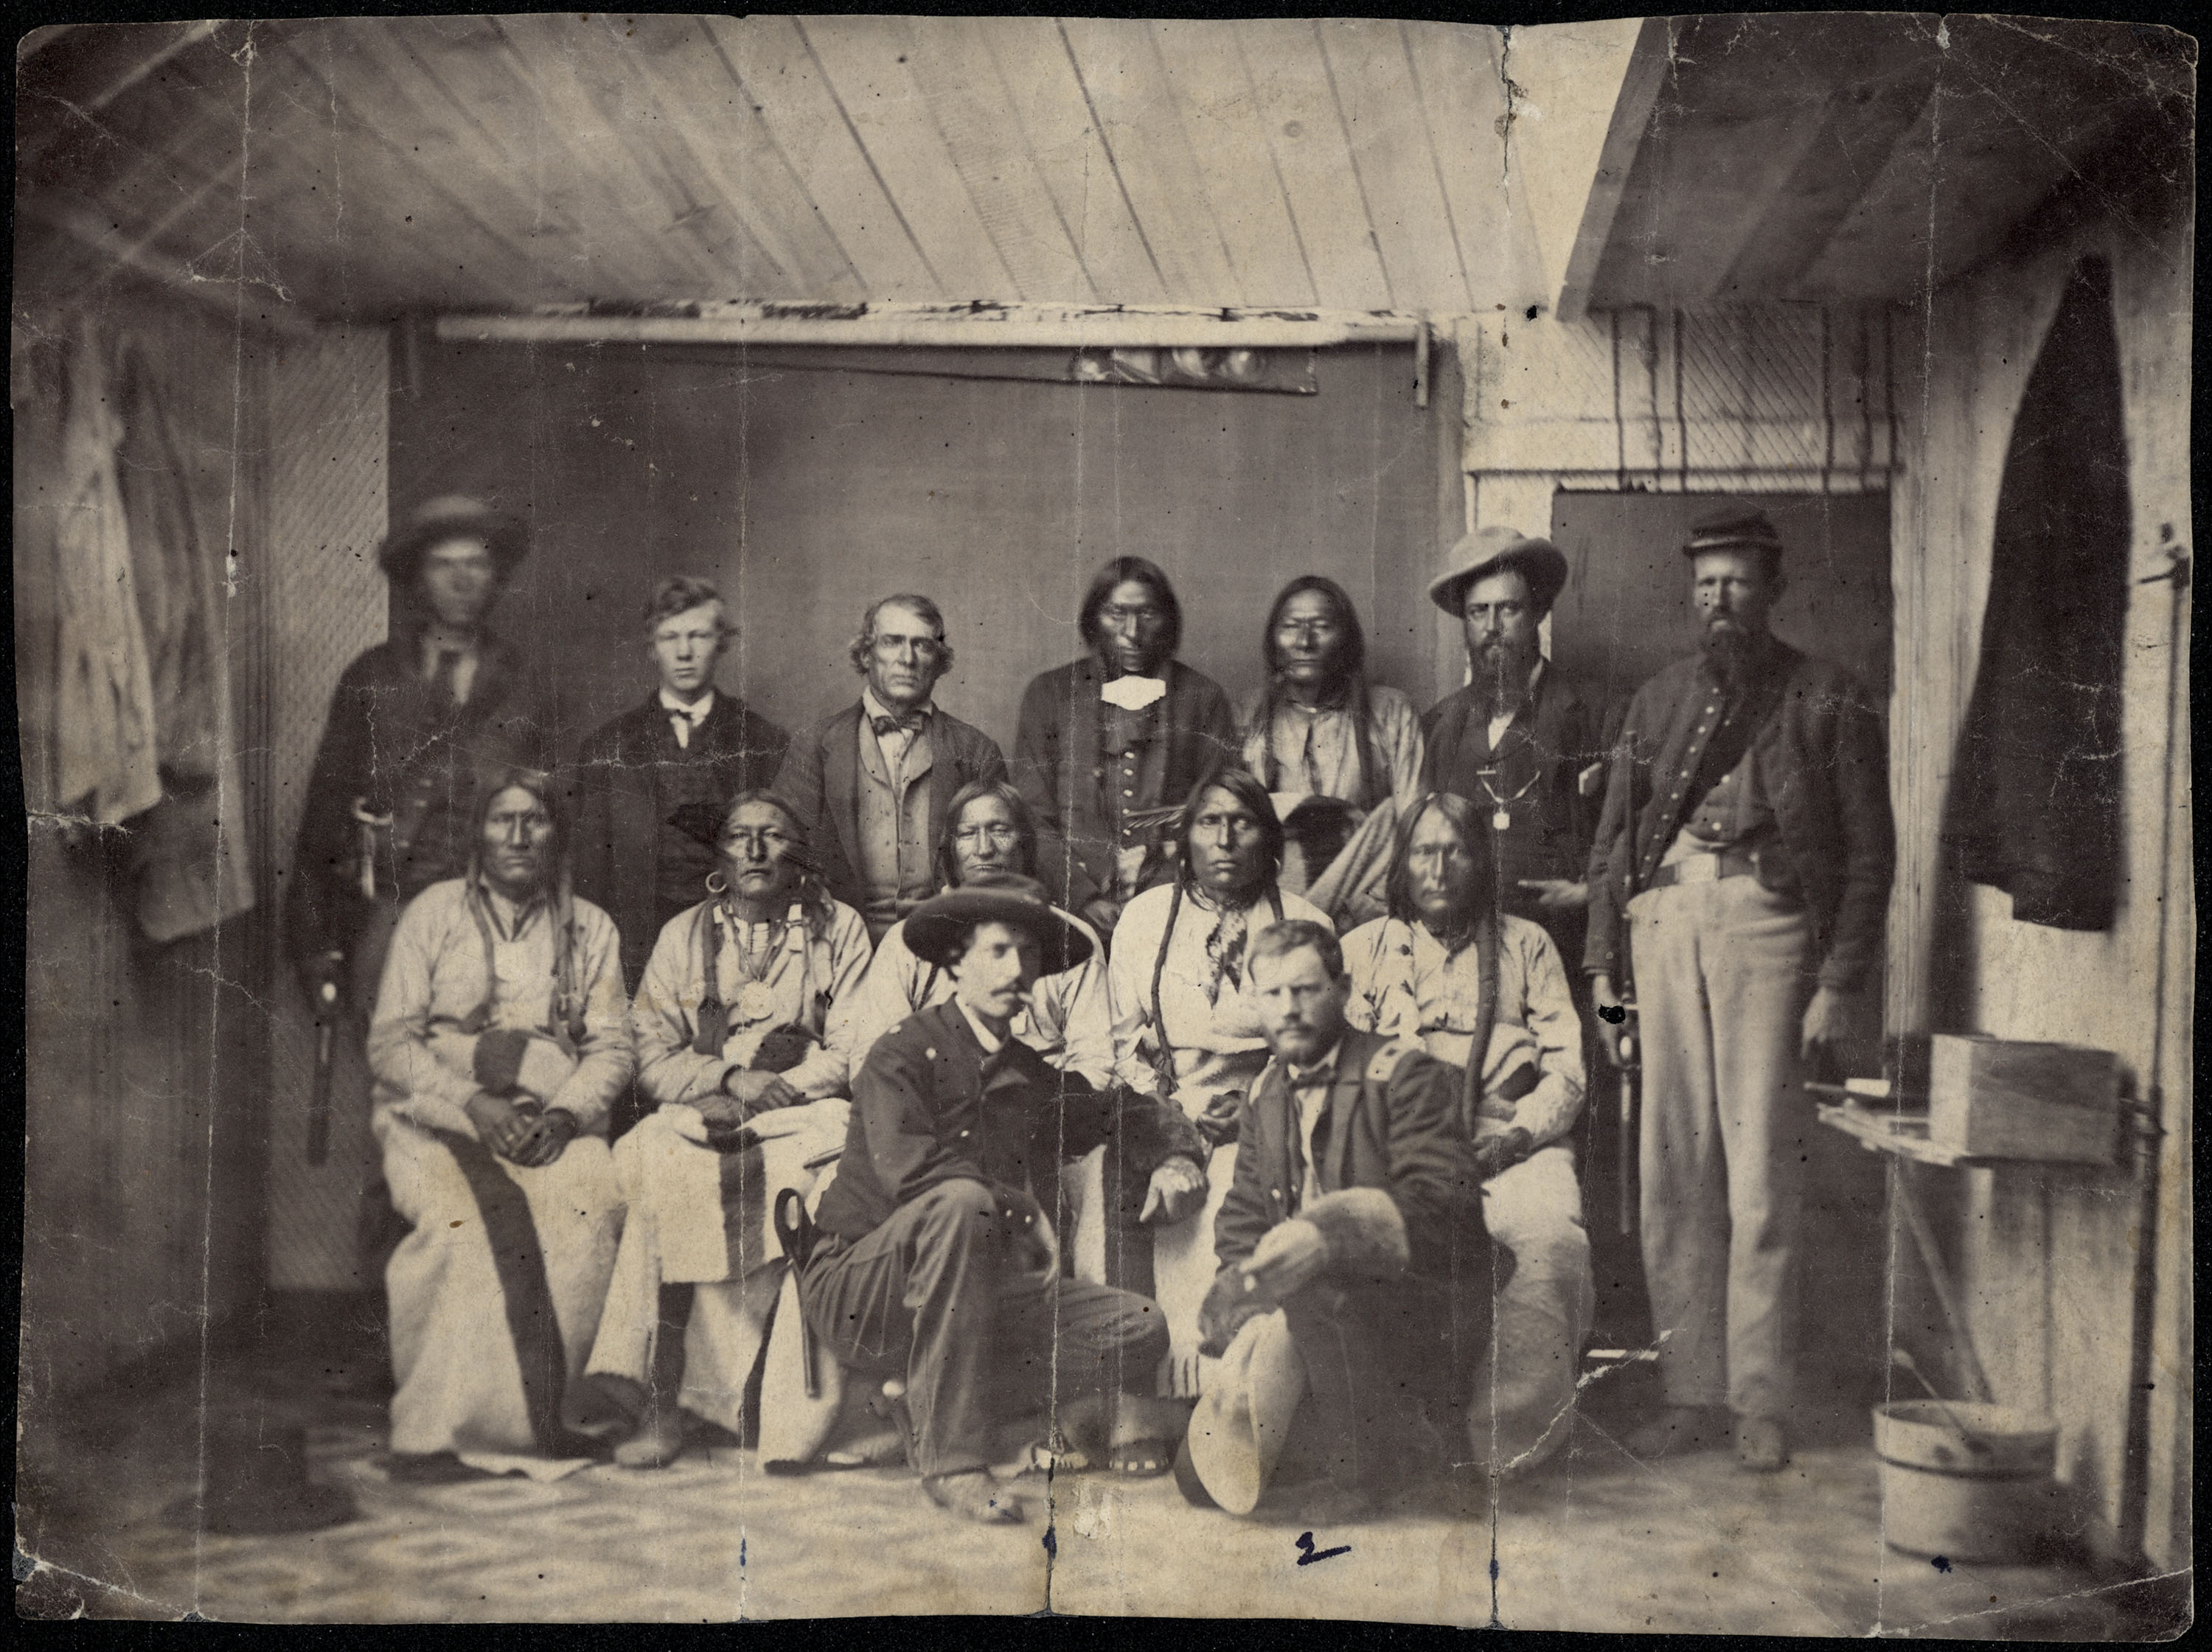 A black and white photo of a group of men posing. Some of the men are Native Americans, some are Anglo-American soldiers.